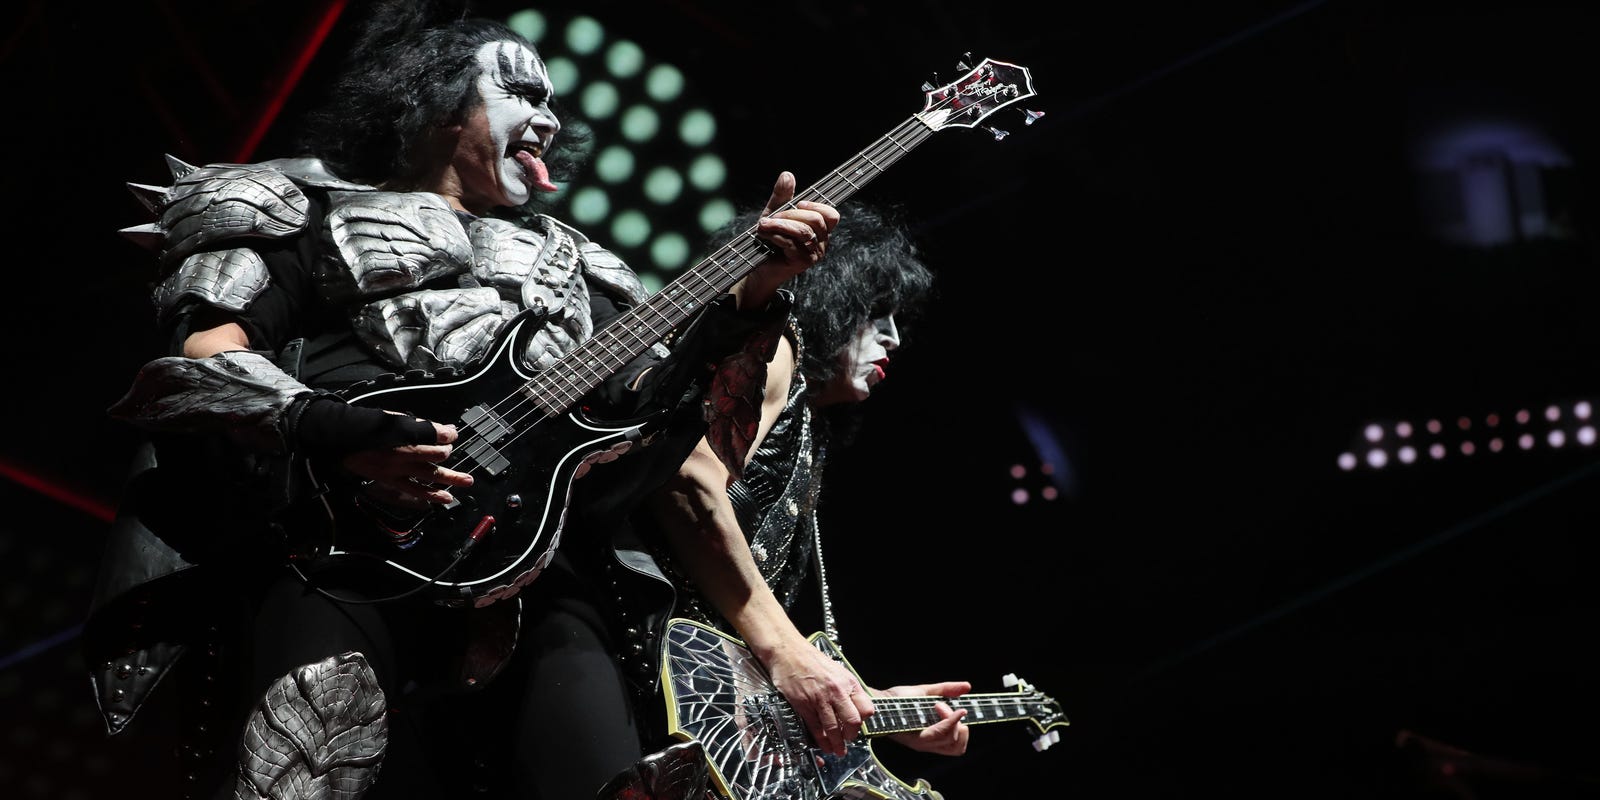 KISS’ final Milwaukee concert, postponed after Gene Simmons and Paul Stanley tested positive for COVID-19, has been rescheduled